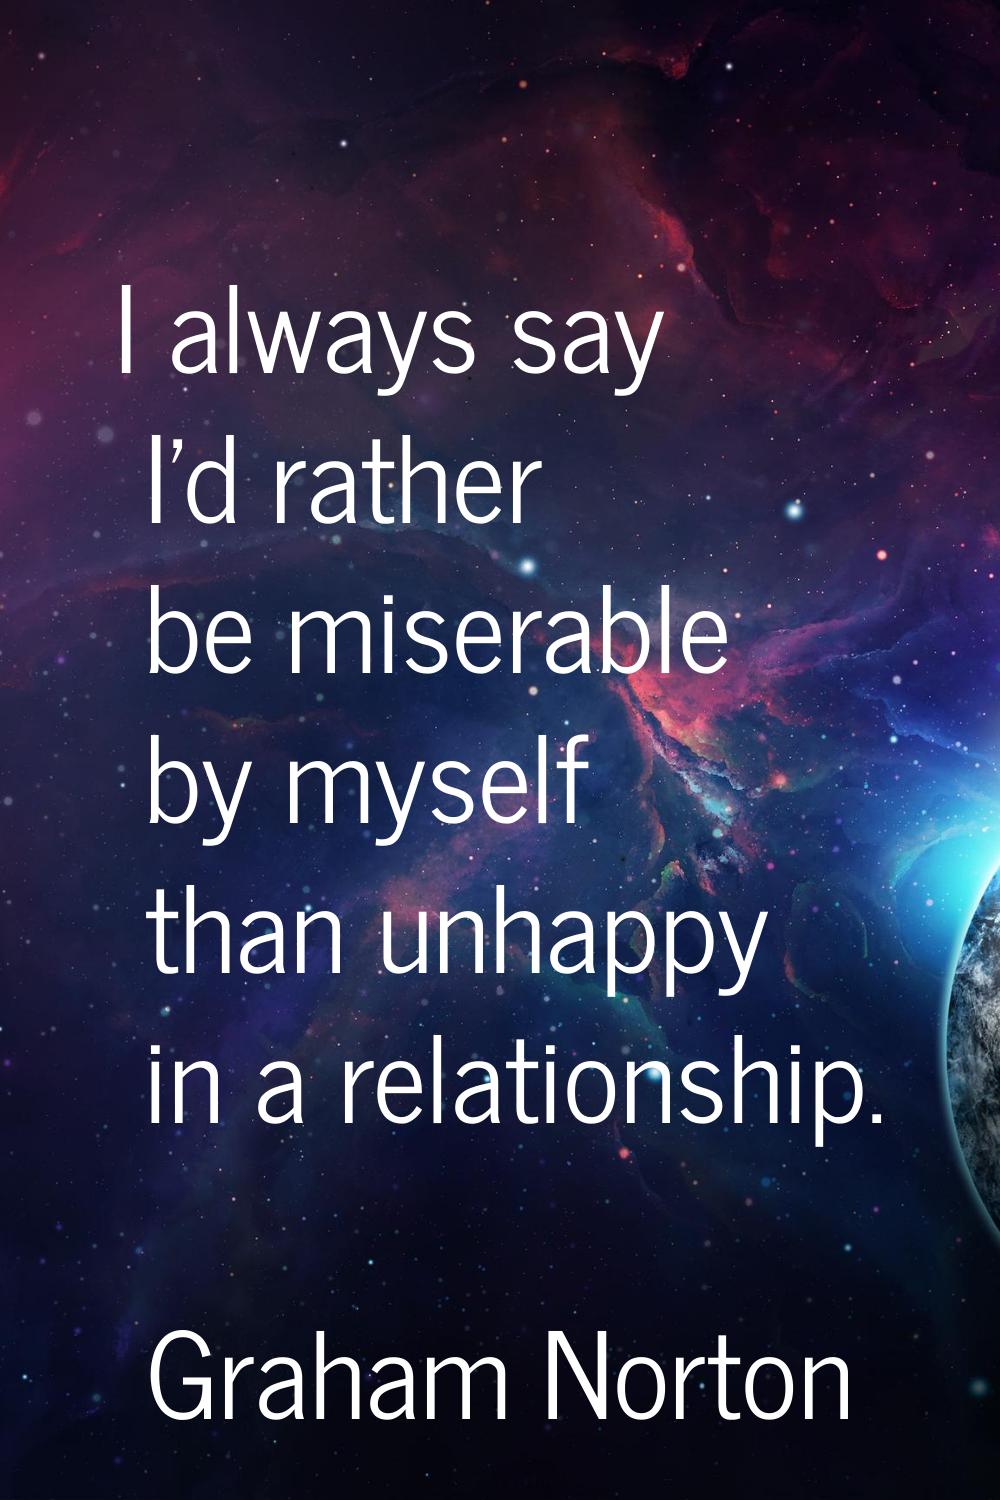 I always say I'd rather be miserable by myself than unhappy in a relationship.